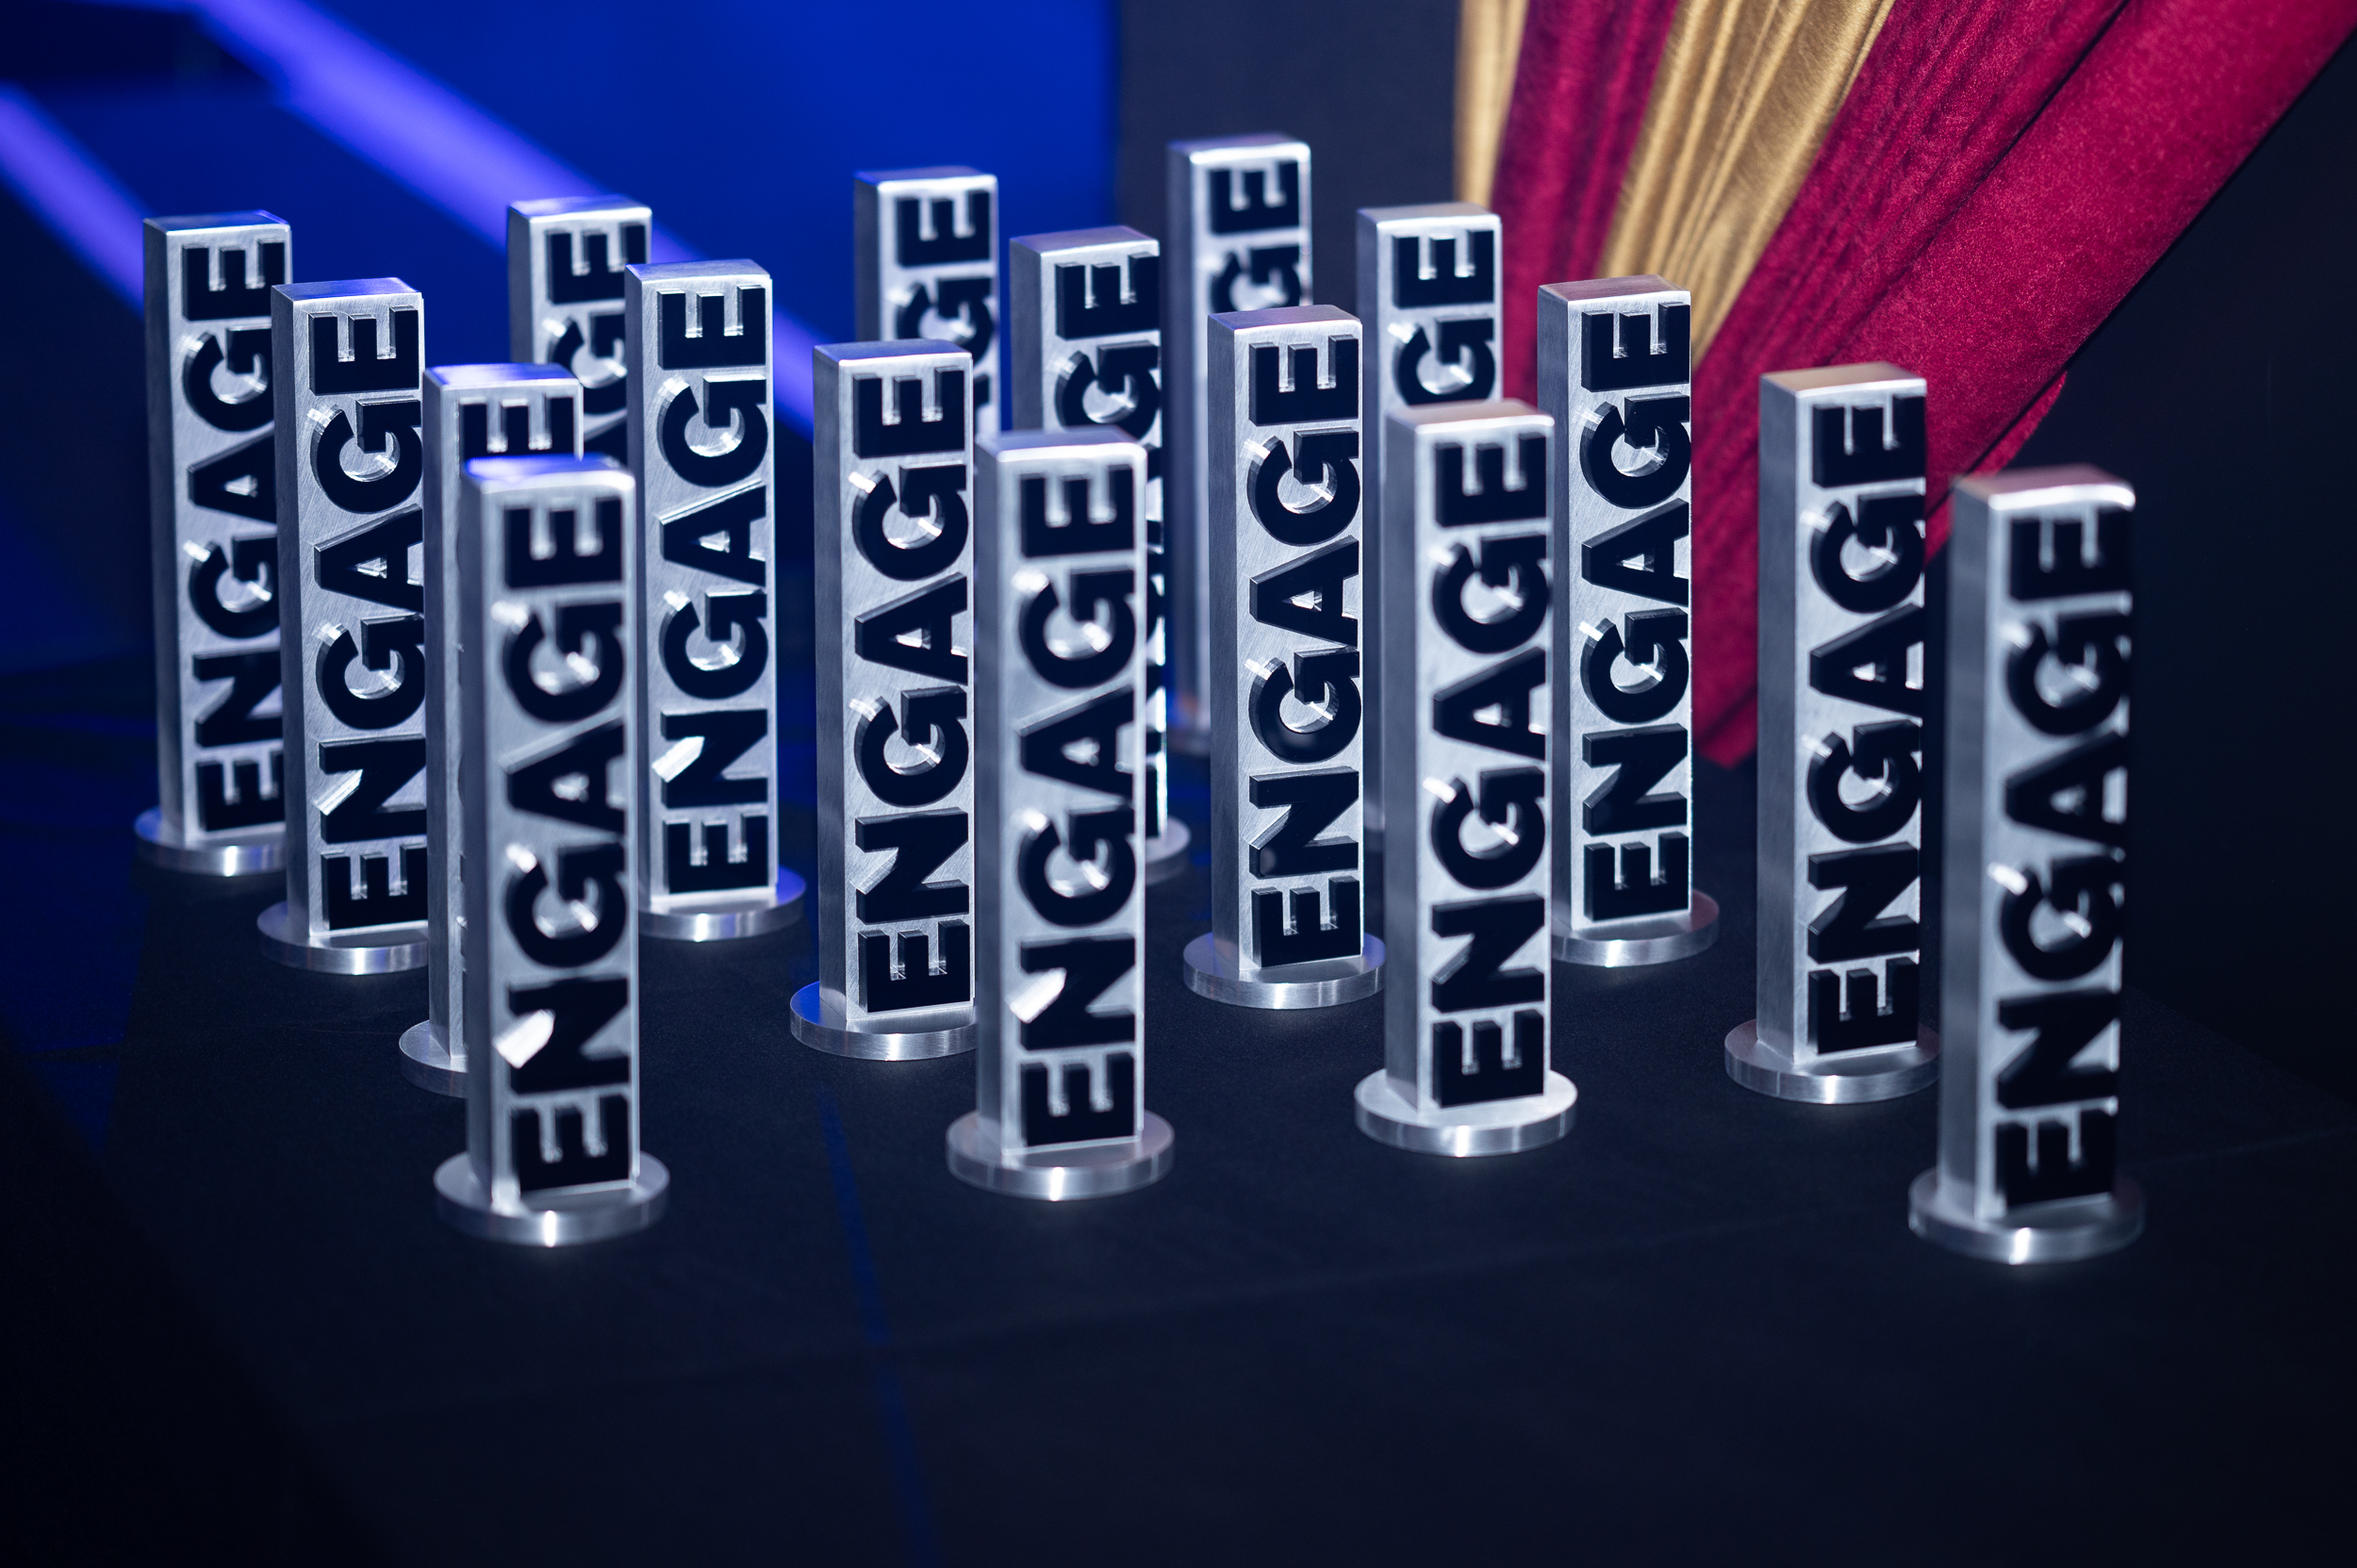 Engage Awards trophies